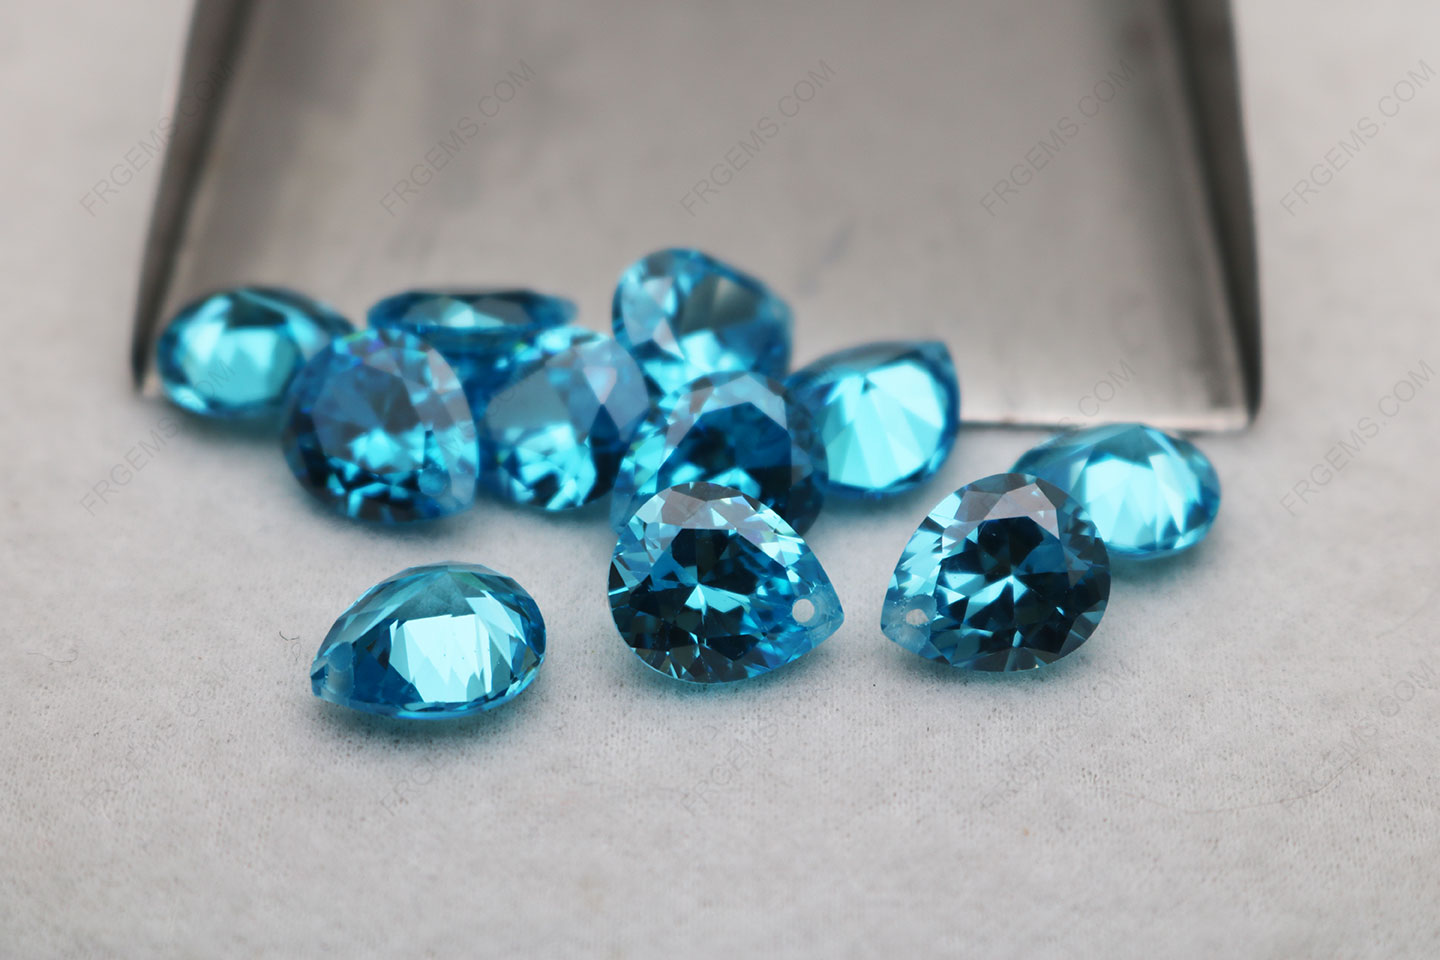 Wholesale loose Cubic Zirconia Aquamarine Blue Color Pear drop Shape Faceted Cut with Drilled hole 10x12mm gemstones